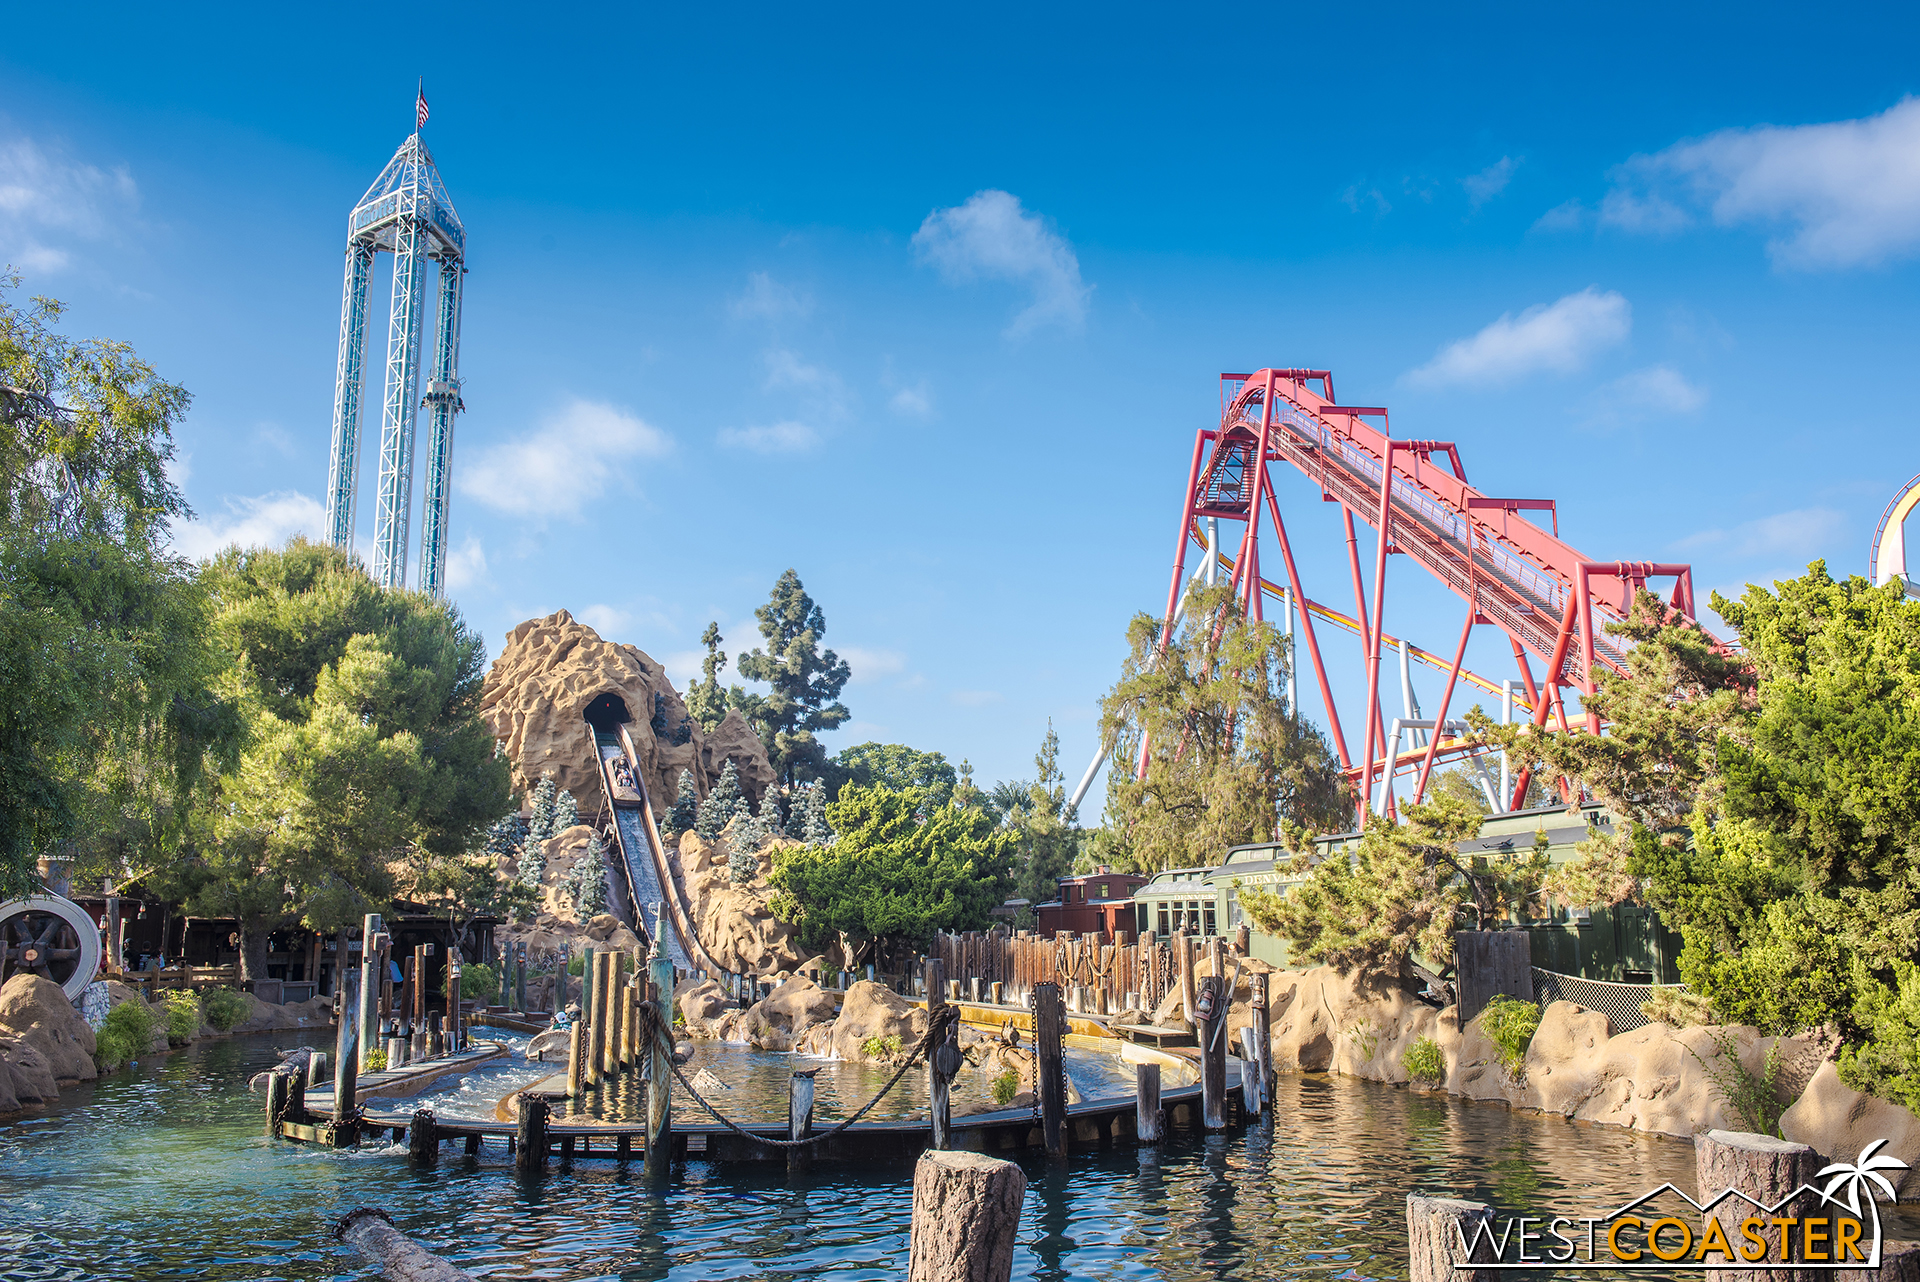  The Log Ride is still thrilling riders after all these decades. 